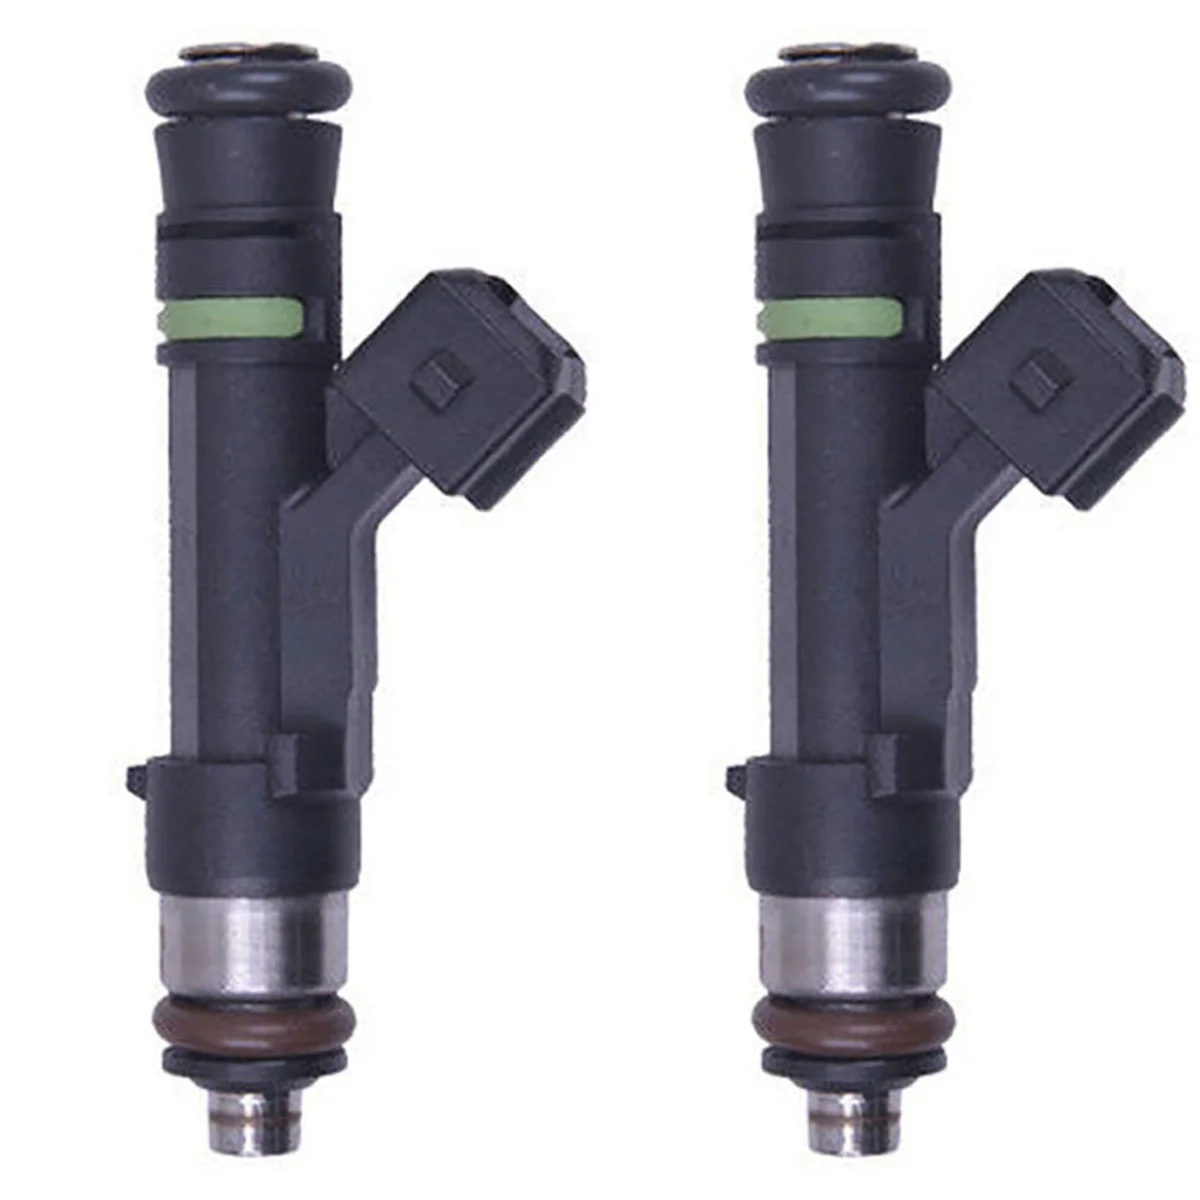 

2X High Quality Fuel Injector for Chevrolet Captiva 2.4L 0280158099